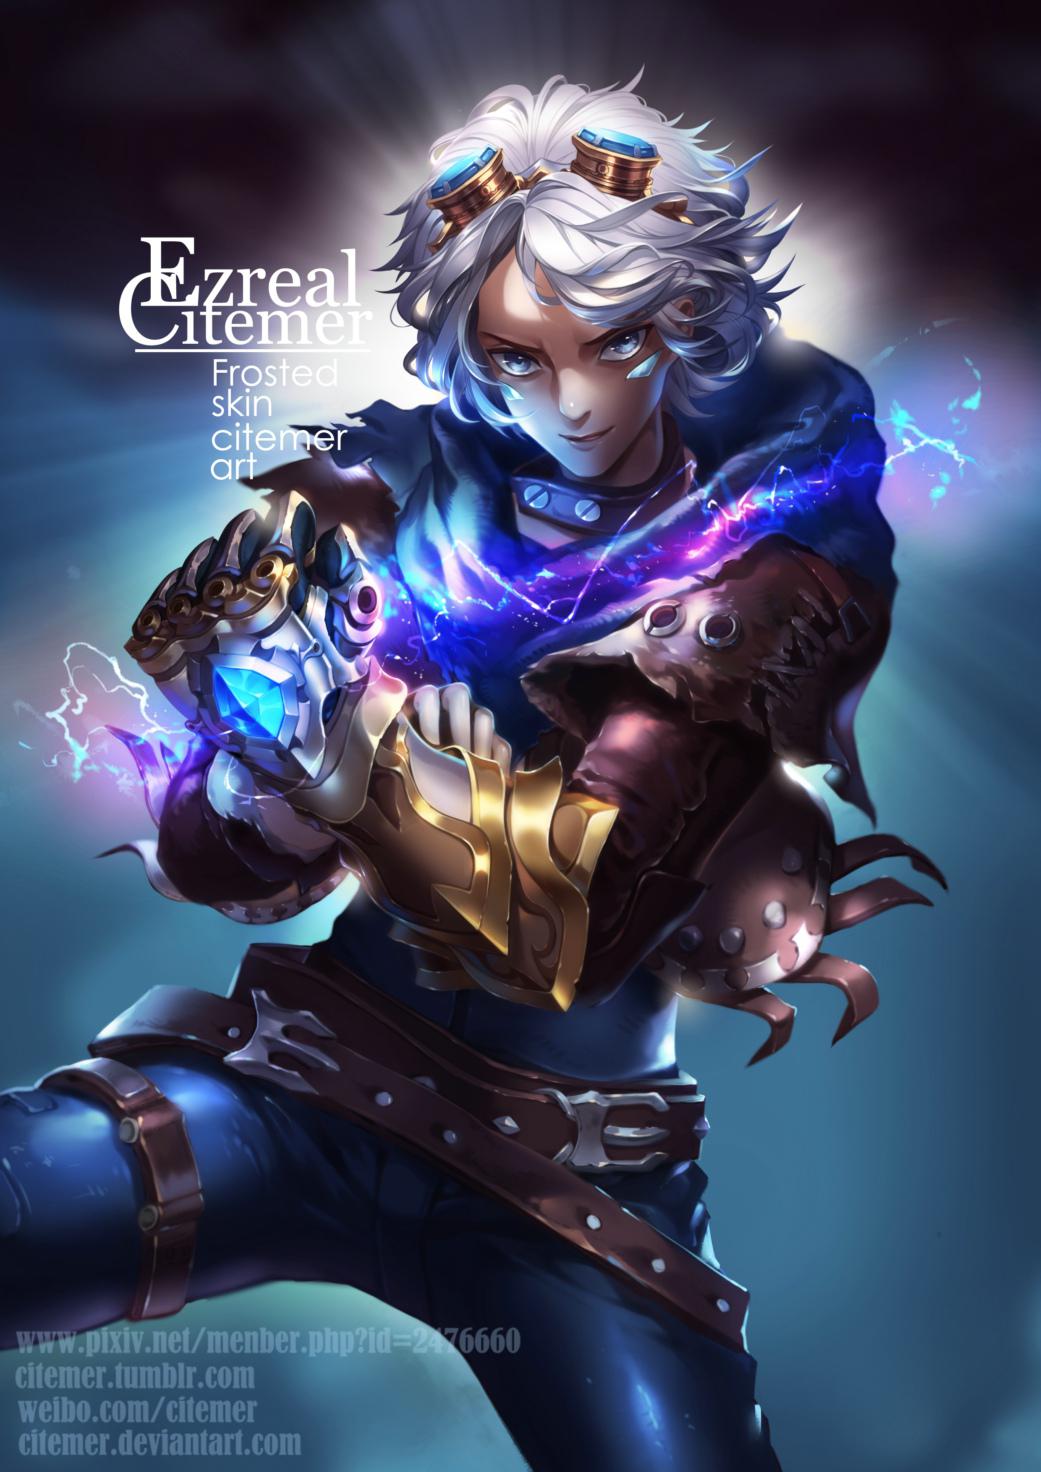 Frosted Ezreal-英雄联盟伊泽瑞尔